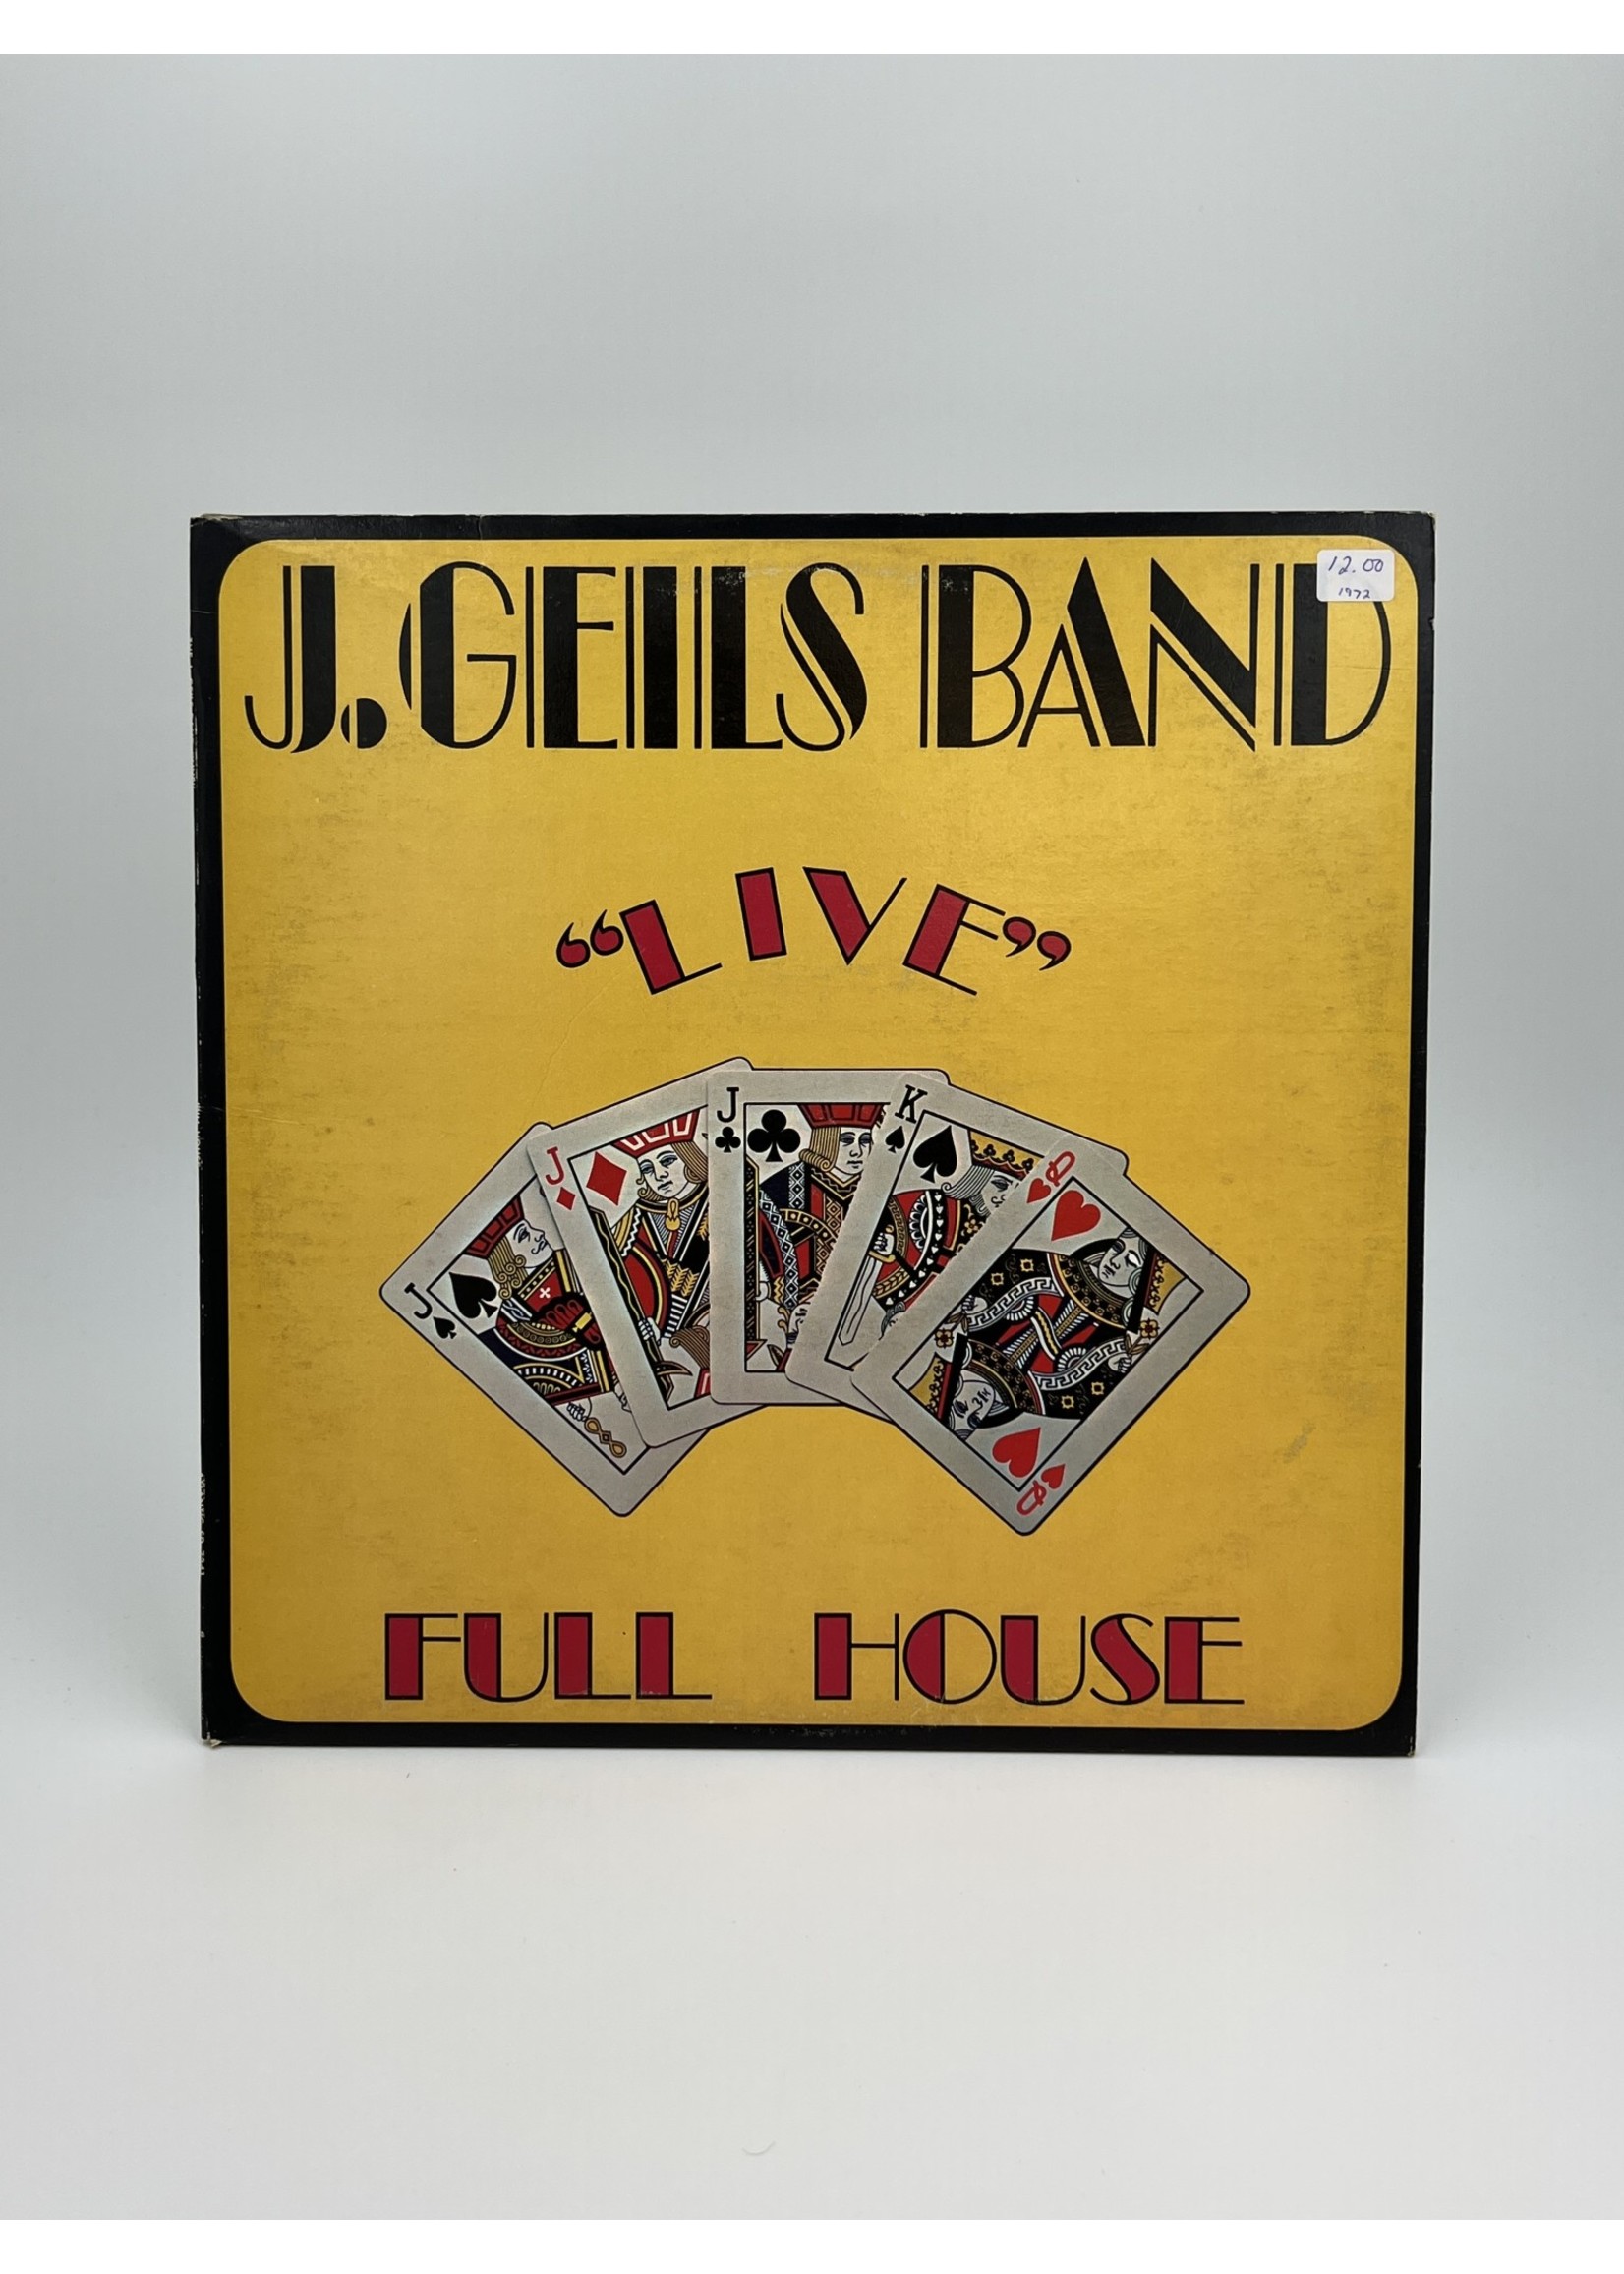 LP The J Geils Band Full House Live LP Record